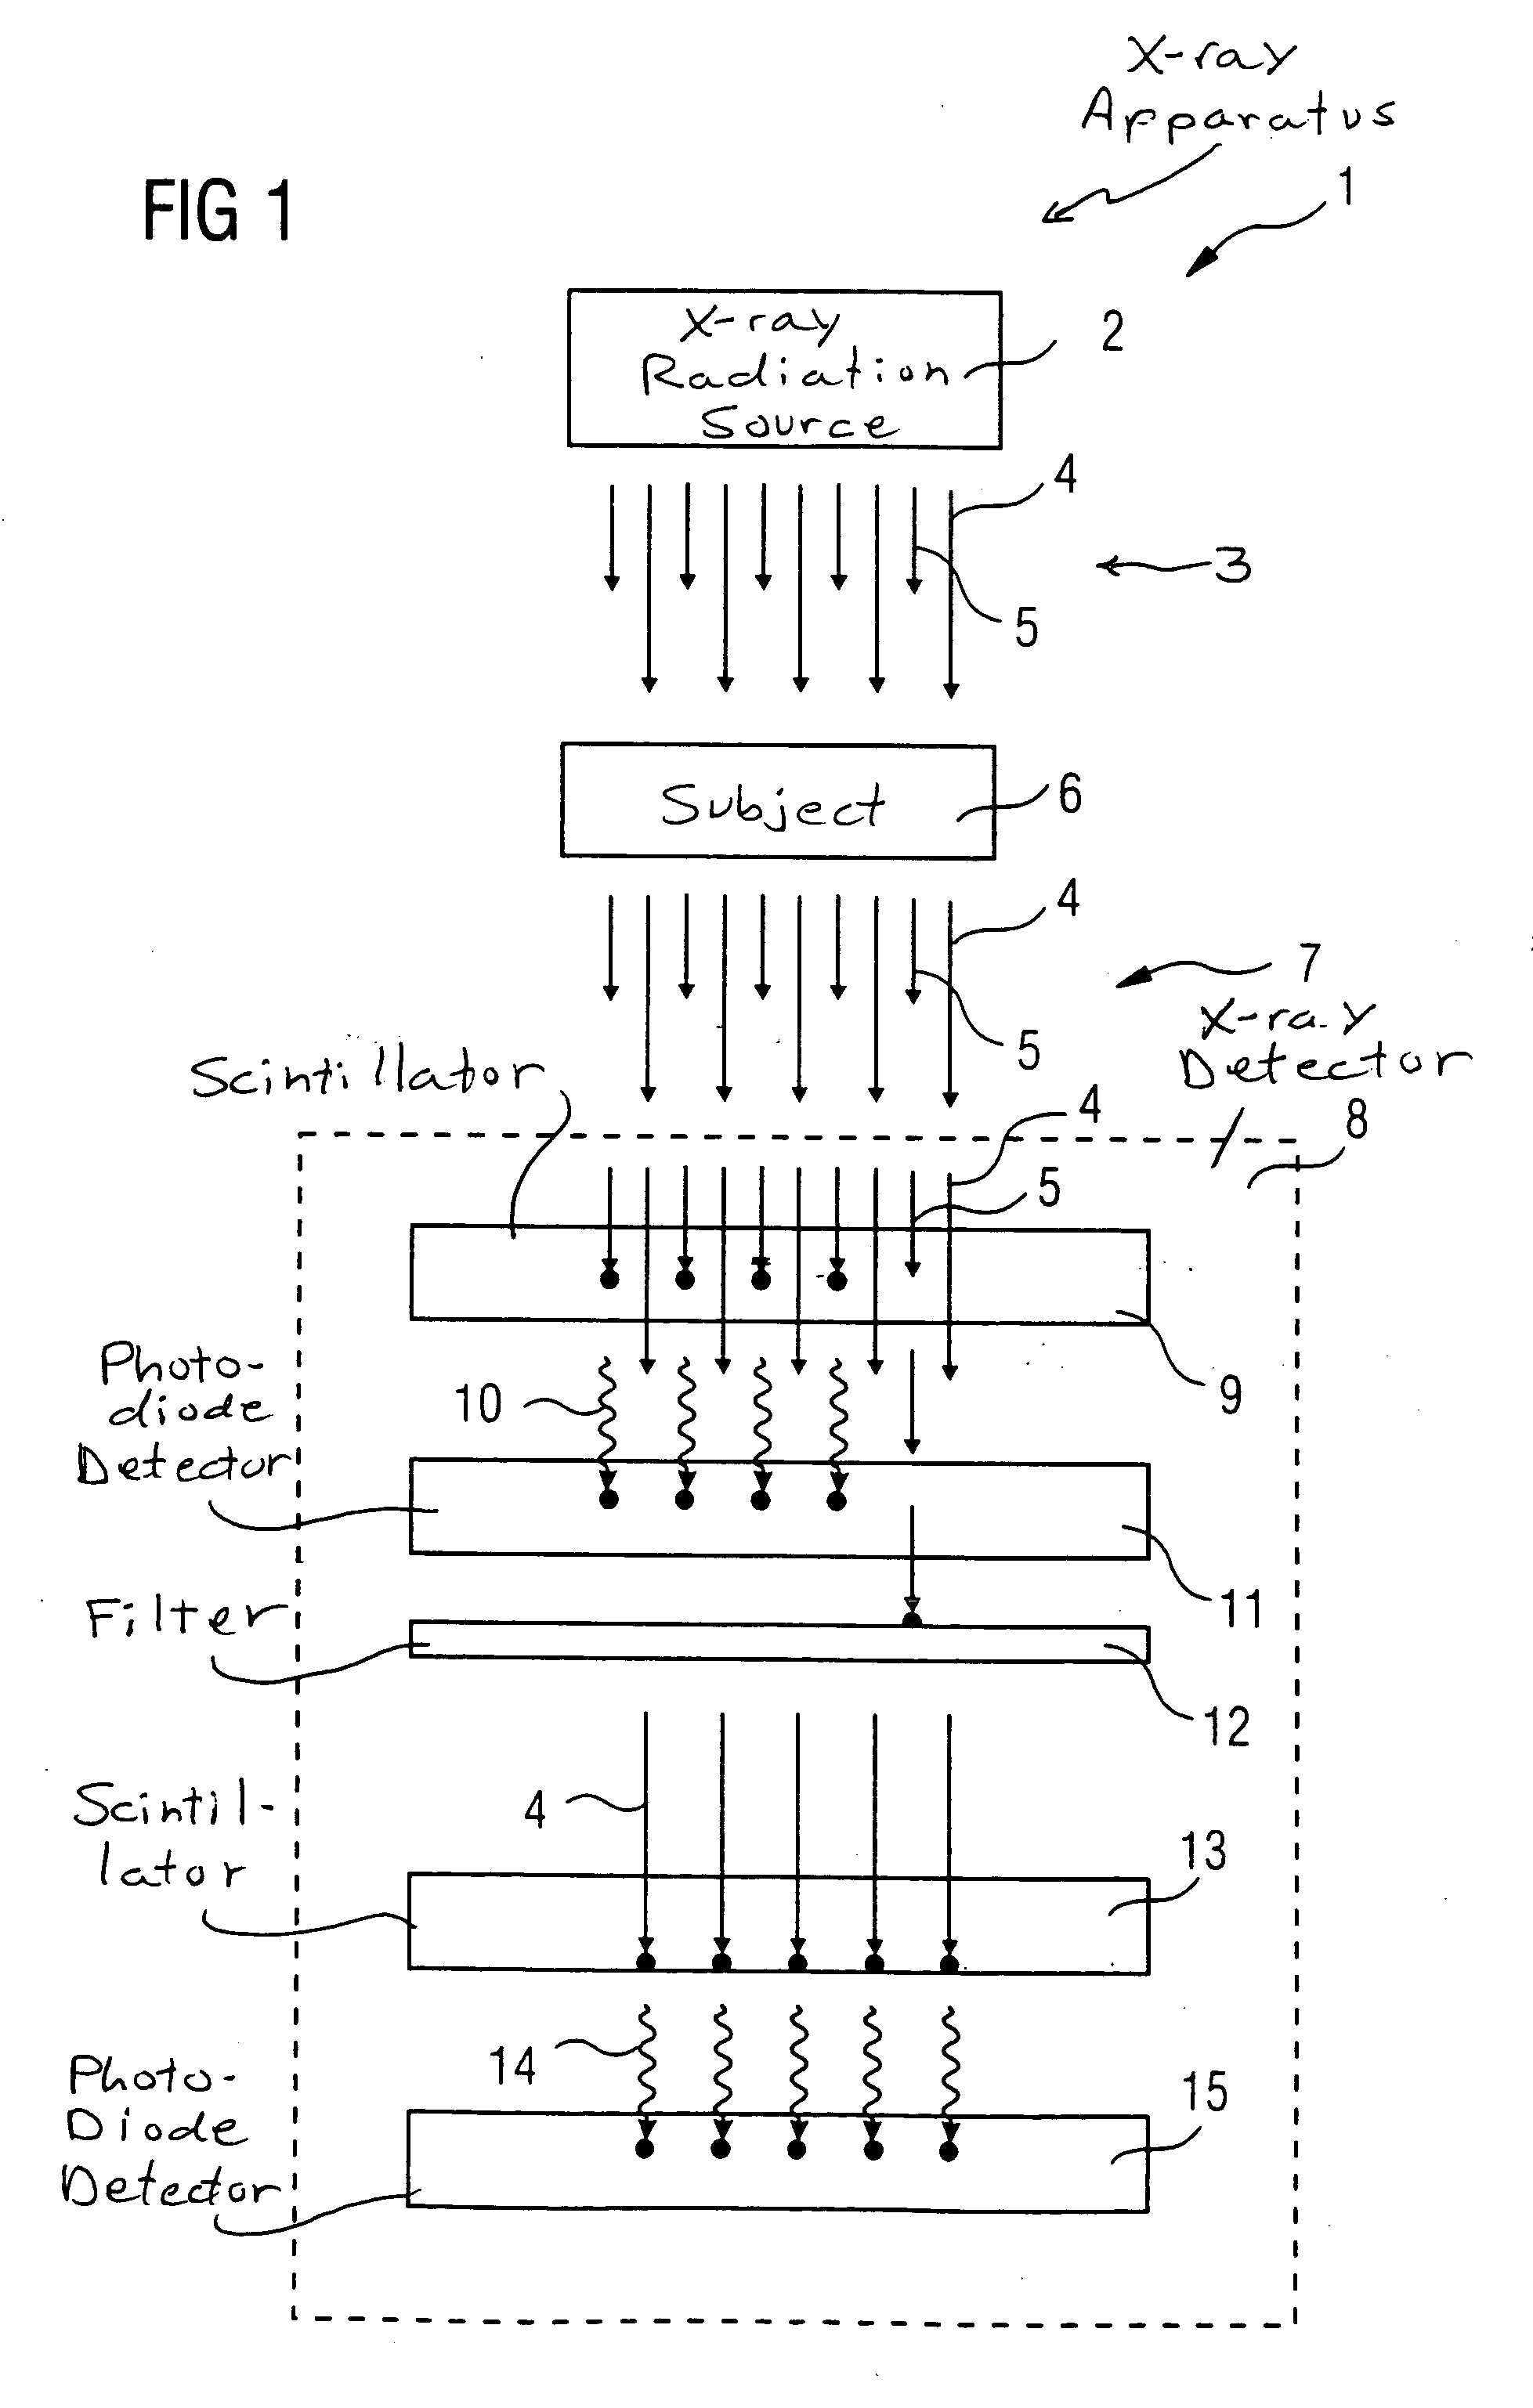 Apparatus and method to acquire images with high-energy photons